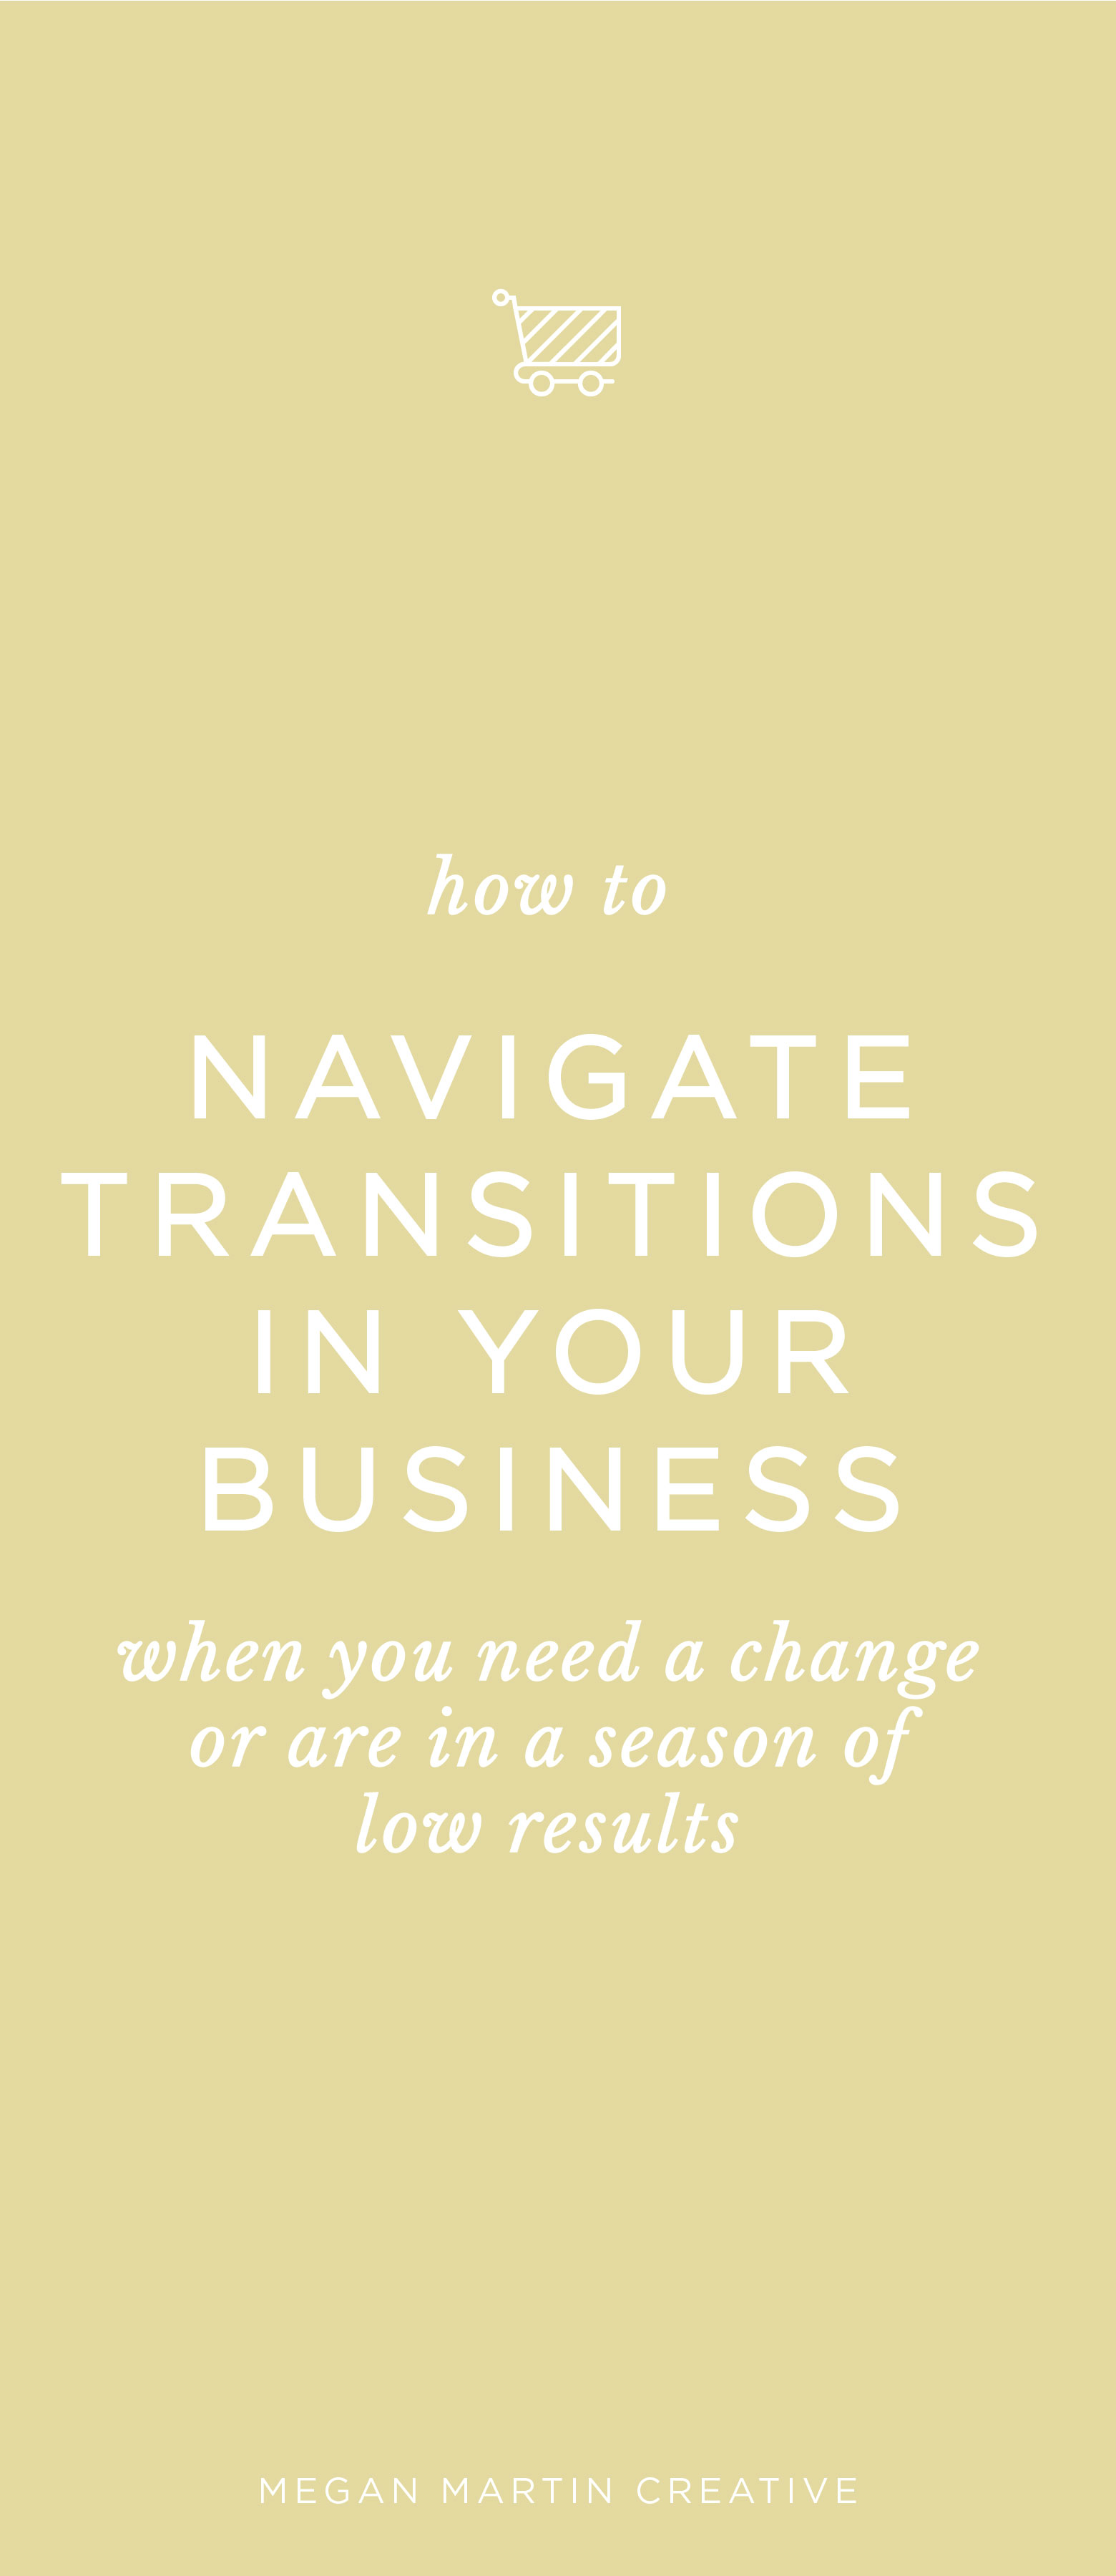 How to navigate transitions in your business when you need (or want!) a change or are in a season of low income on Megan Martin Creative, how to grow your business, business tips, business growth, how to change your business focus, business education, creative entrepreneur